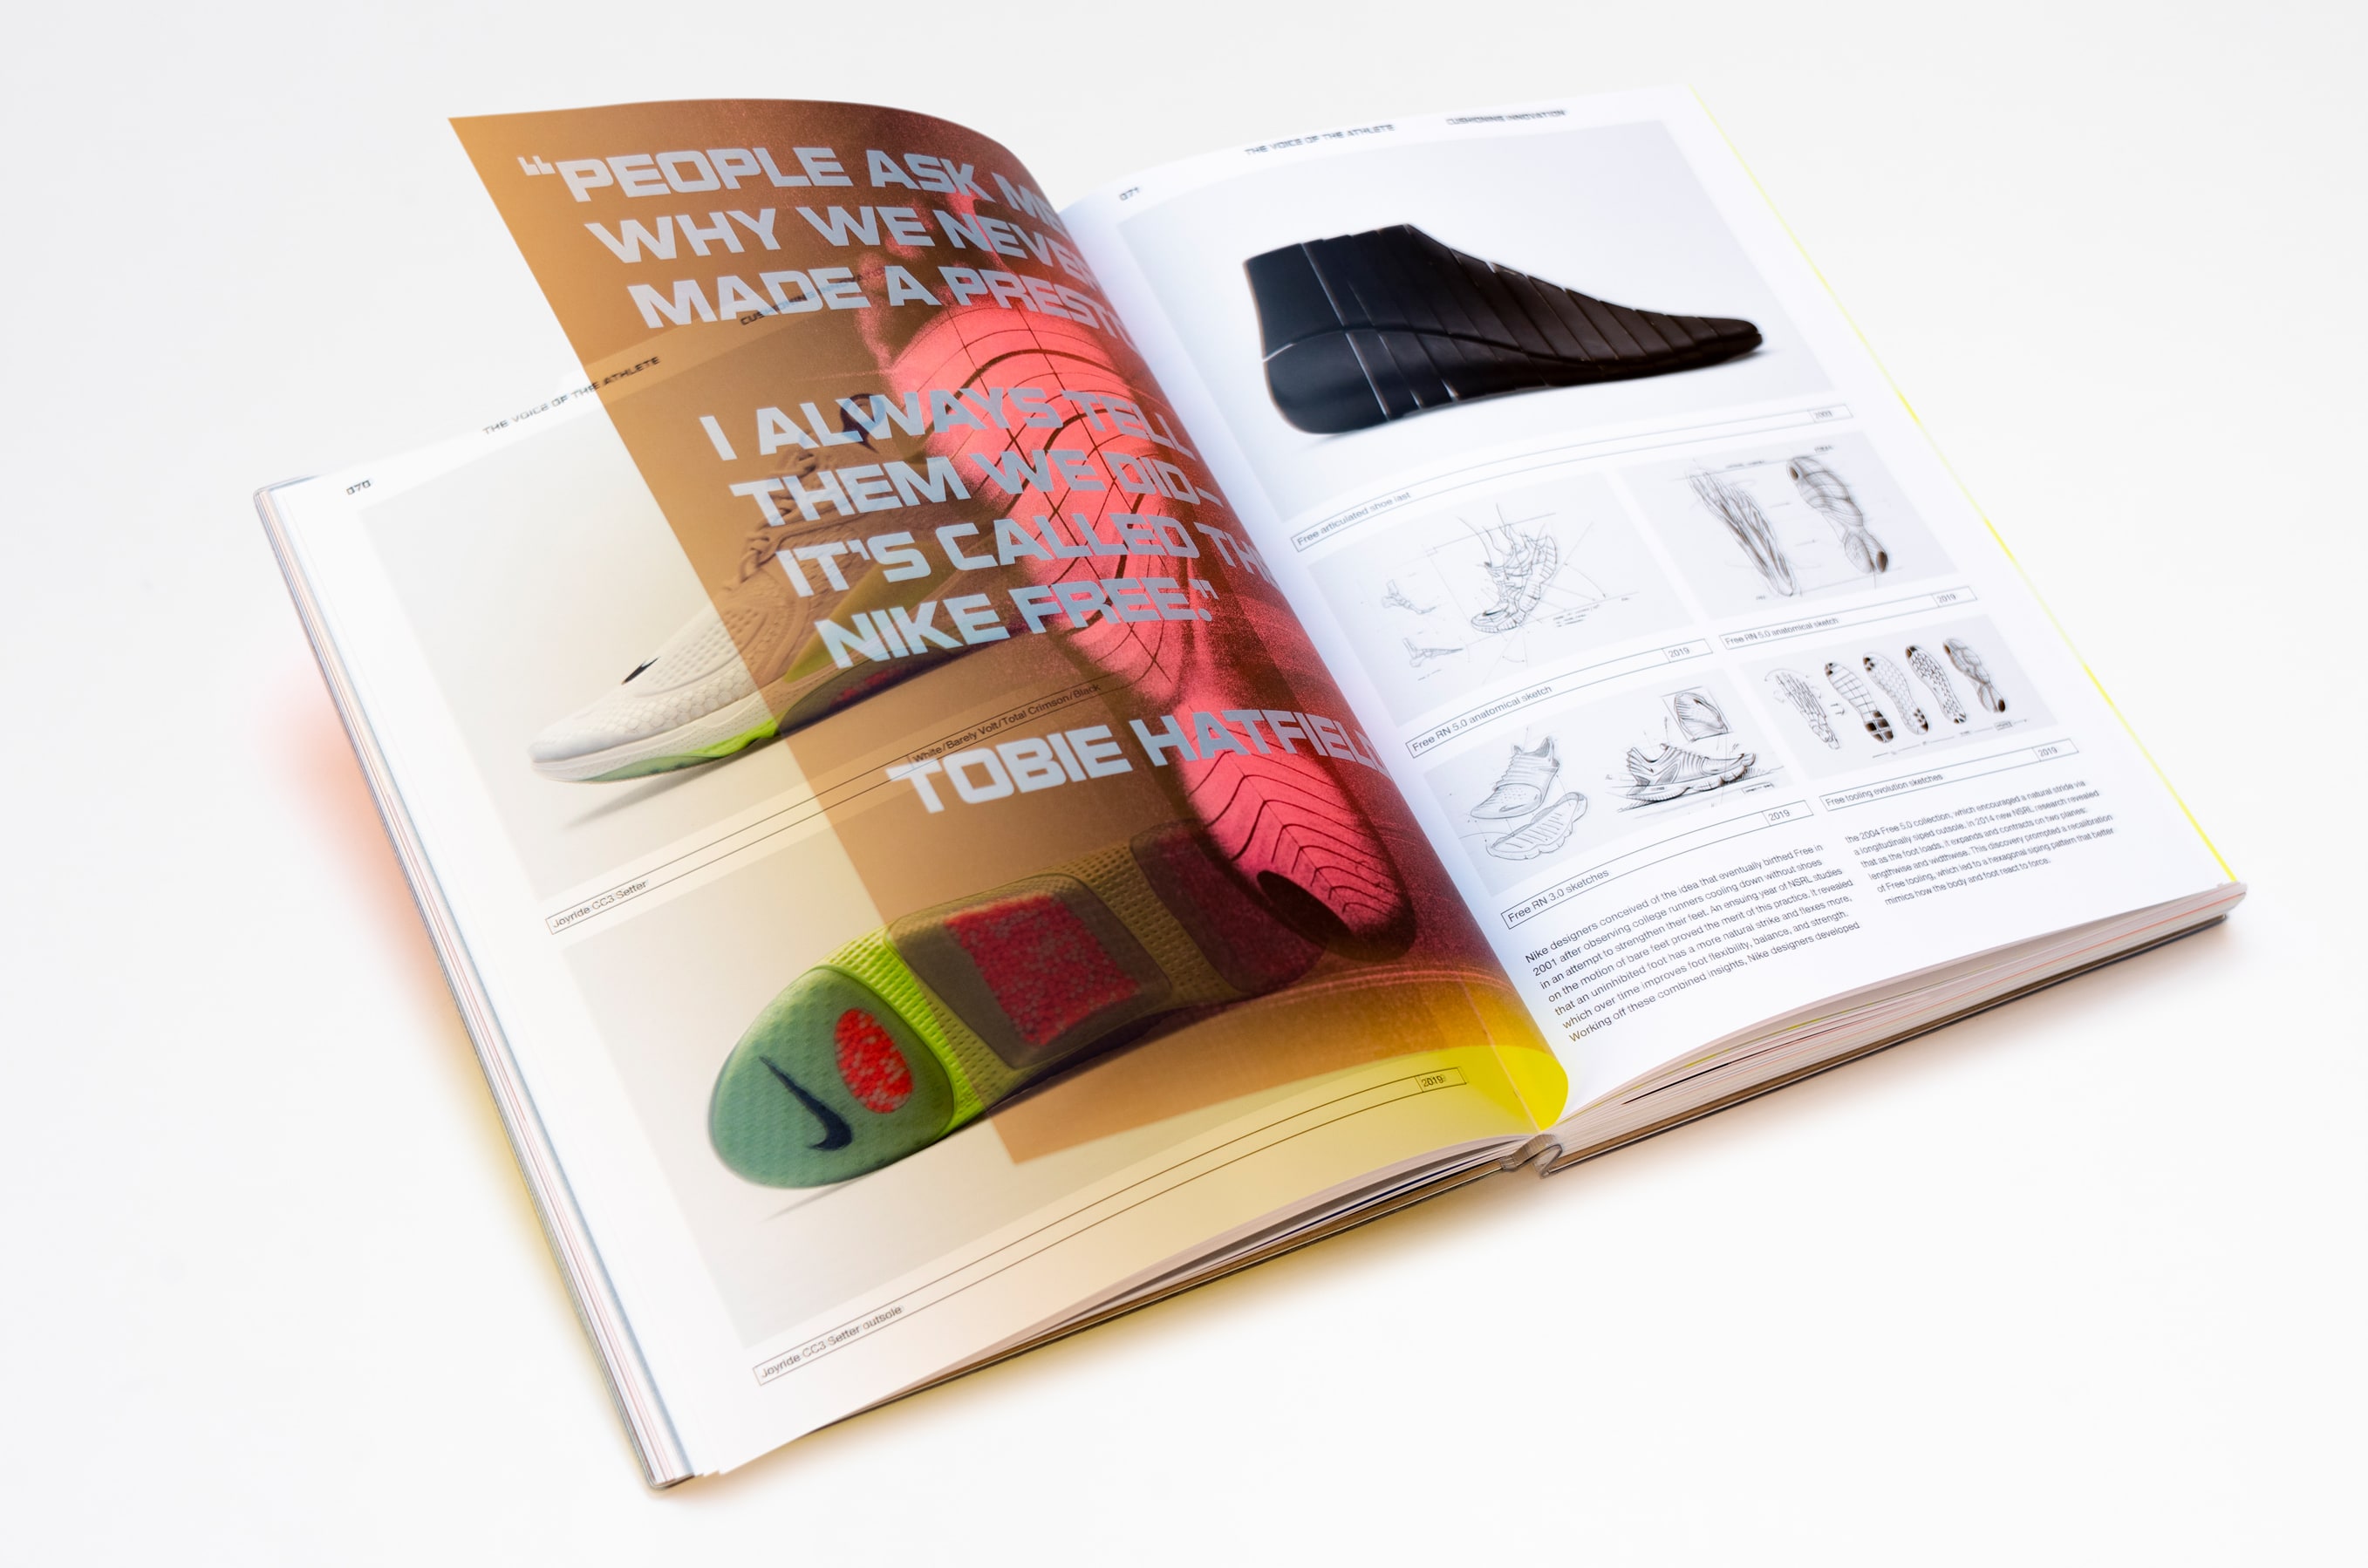 New Nike Book Explores How Its Iconic Designs Were Created - The Elite